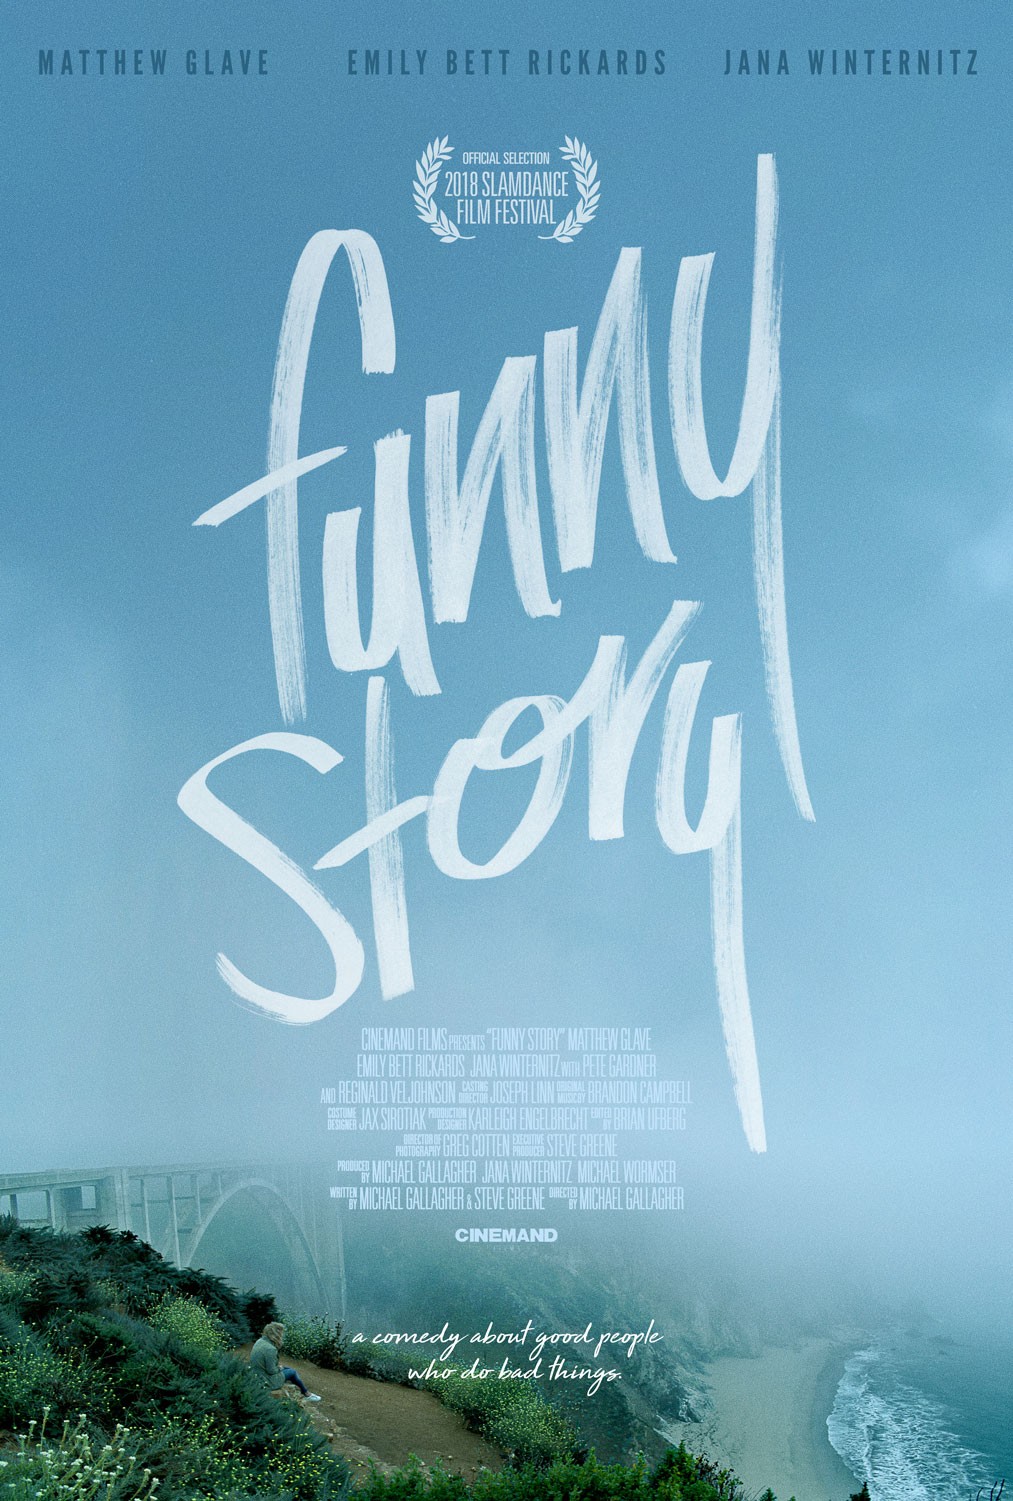 Funny Story: Trailer 1 - Trailers & Videos - Rotten Tomatoes